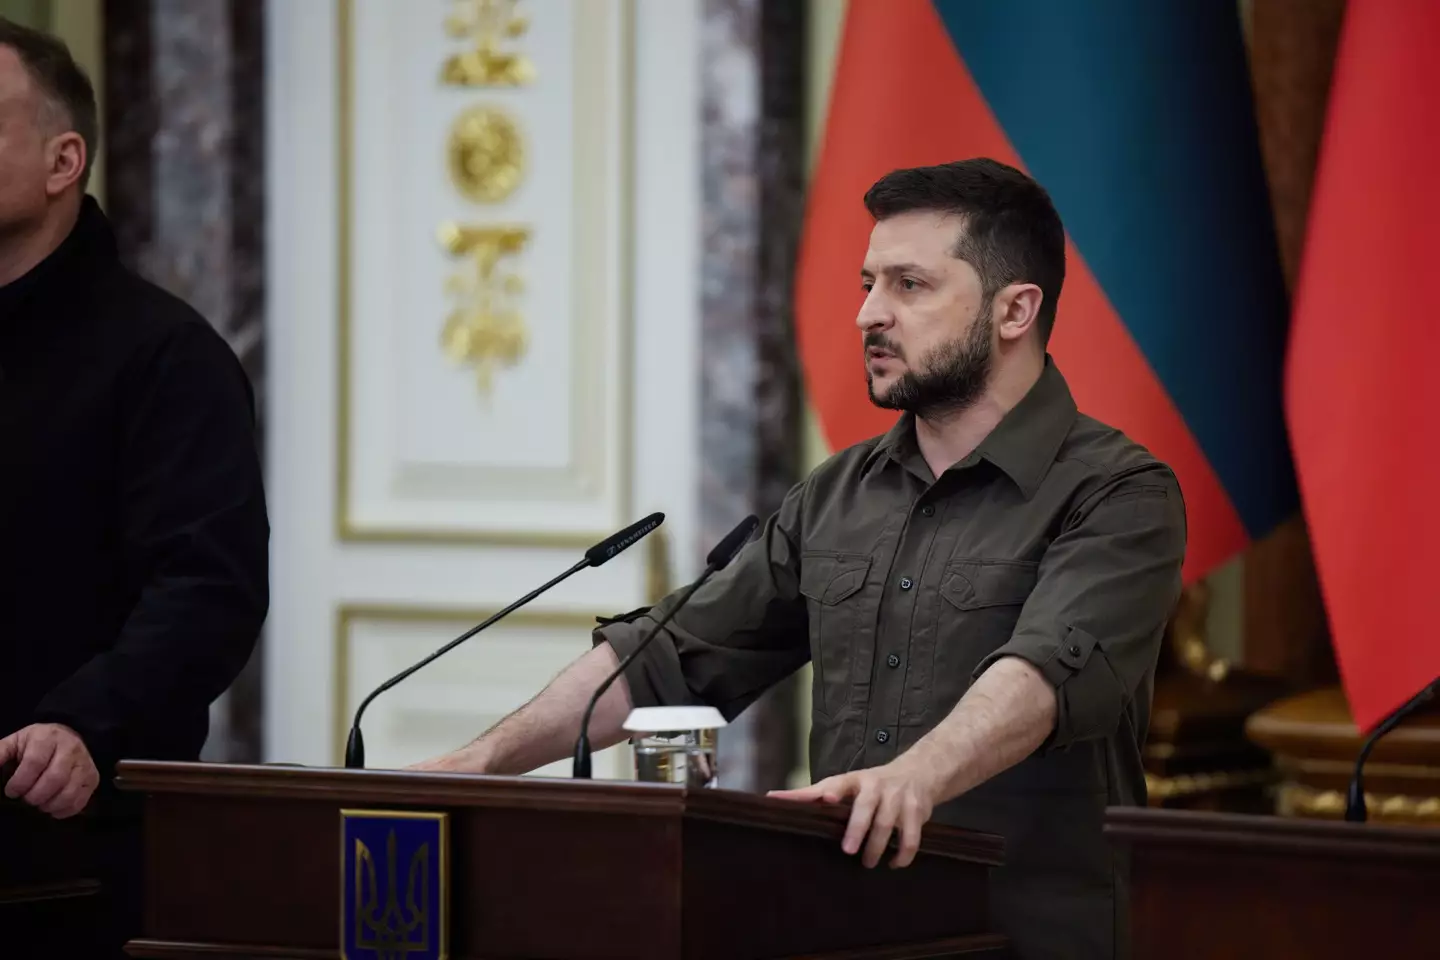 Ukrainian President Volodymyr Zelenskyy explained how it's 'difficult to talk' about the civilian death toll.